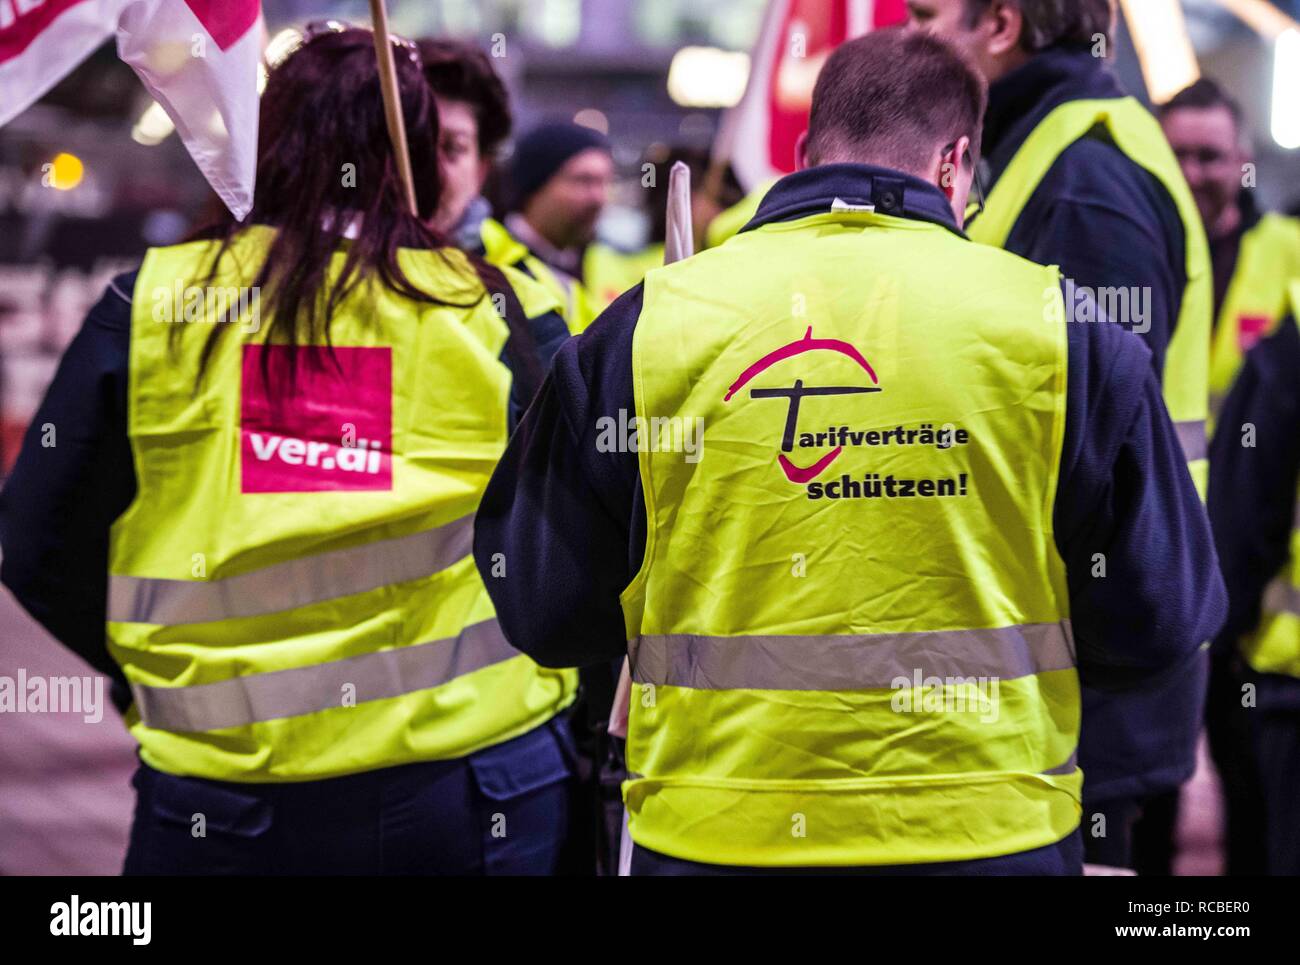 Munich, Bavaria, Germany. 15th Jan, 2019. The logo of the Verdi union and ''protect work contracts'' worn by striking airport security workers in Munich, Germany. Citing a breakdown in talks with employers on December 21st, the German Ver.di union organized the latest warning strike in a series at the Munich International Airport with members employed in Airport Security Services (Luftsicherheit) walking out from 3:30am to 24:00. The union is demanding 20 Euros per hour for their 1,000 total members working in Passenger-, Freight, Personnel, and Goods Control of Airport Security, along wi Stock Photo